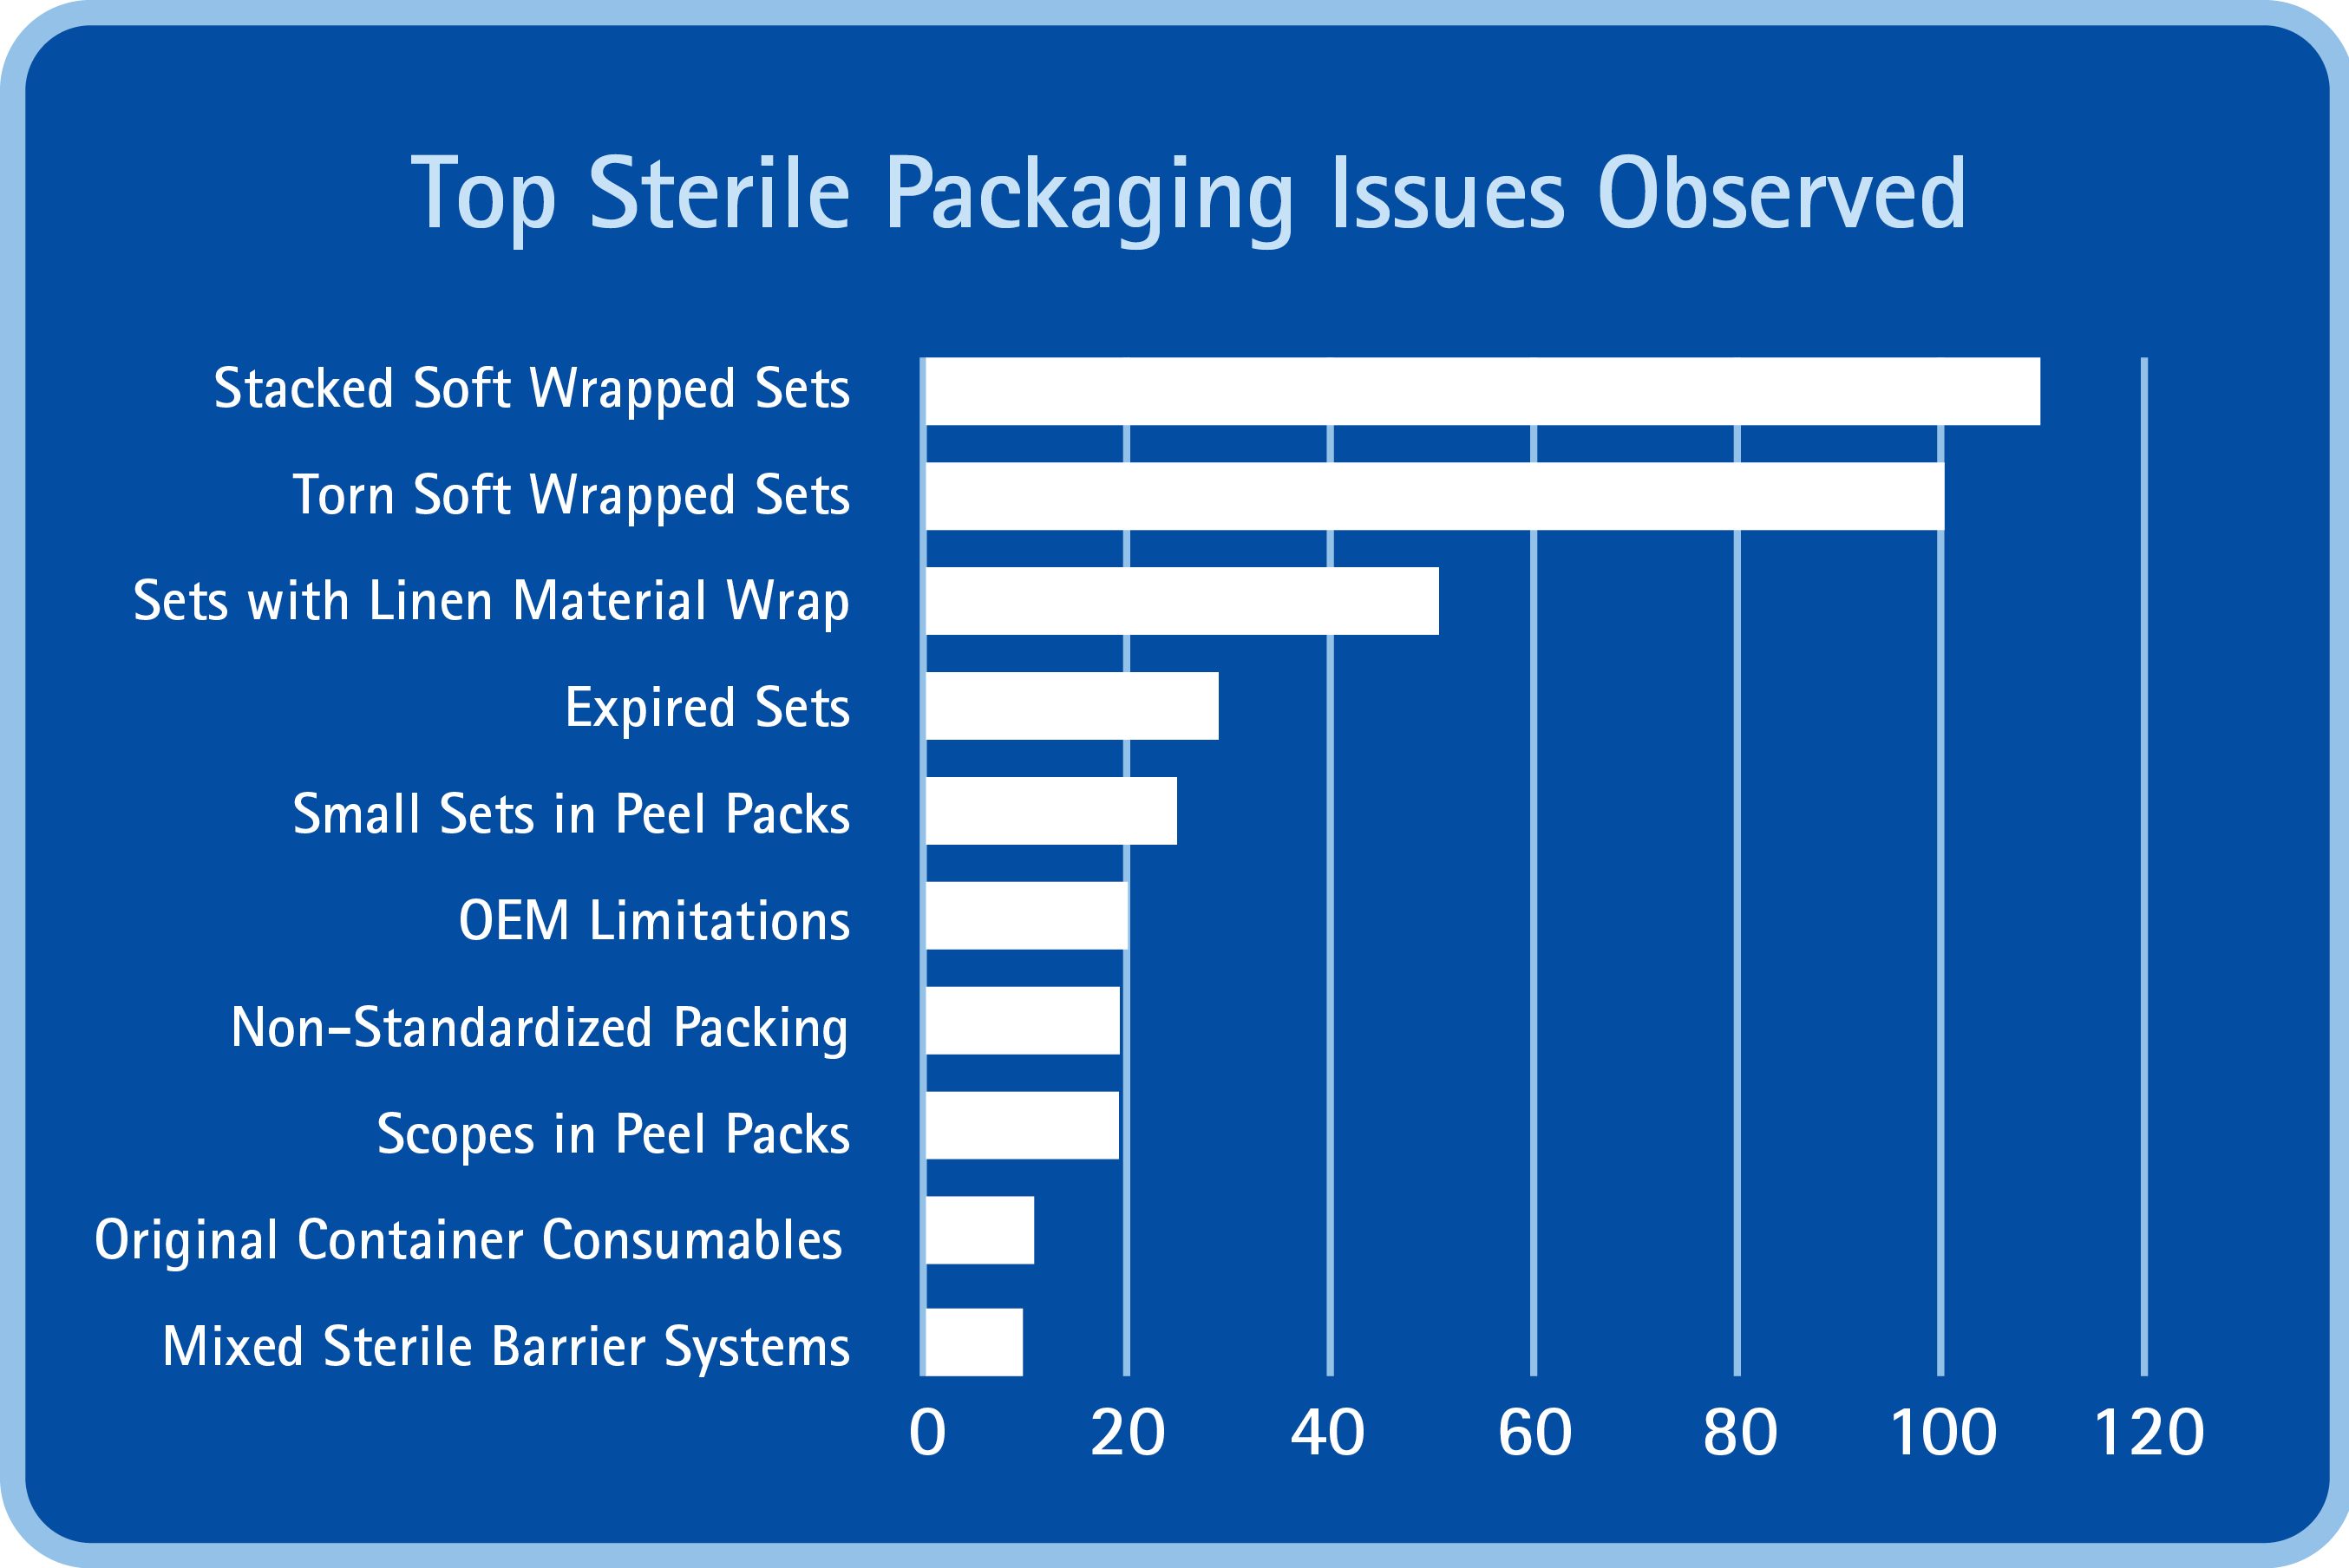 Chart showing top sterile packaging issues observed